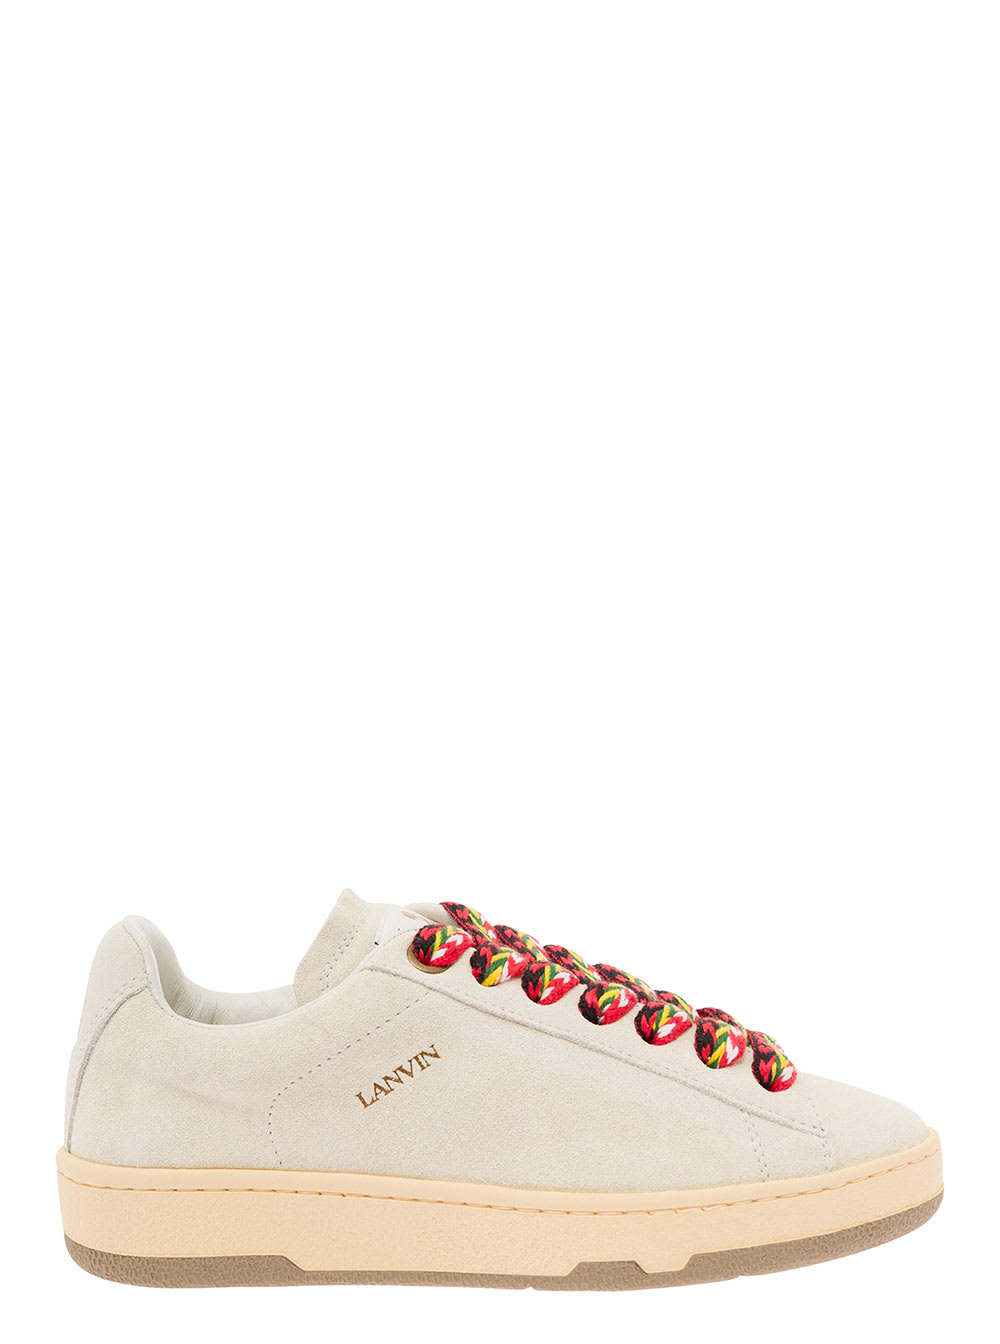 Lanvin Lite Curb White Low Top Trainers With Oversized Multicolor Laces In Leather Woman